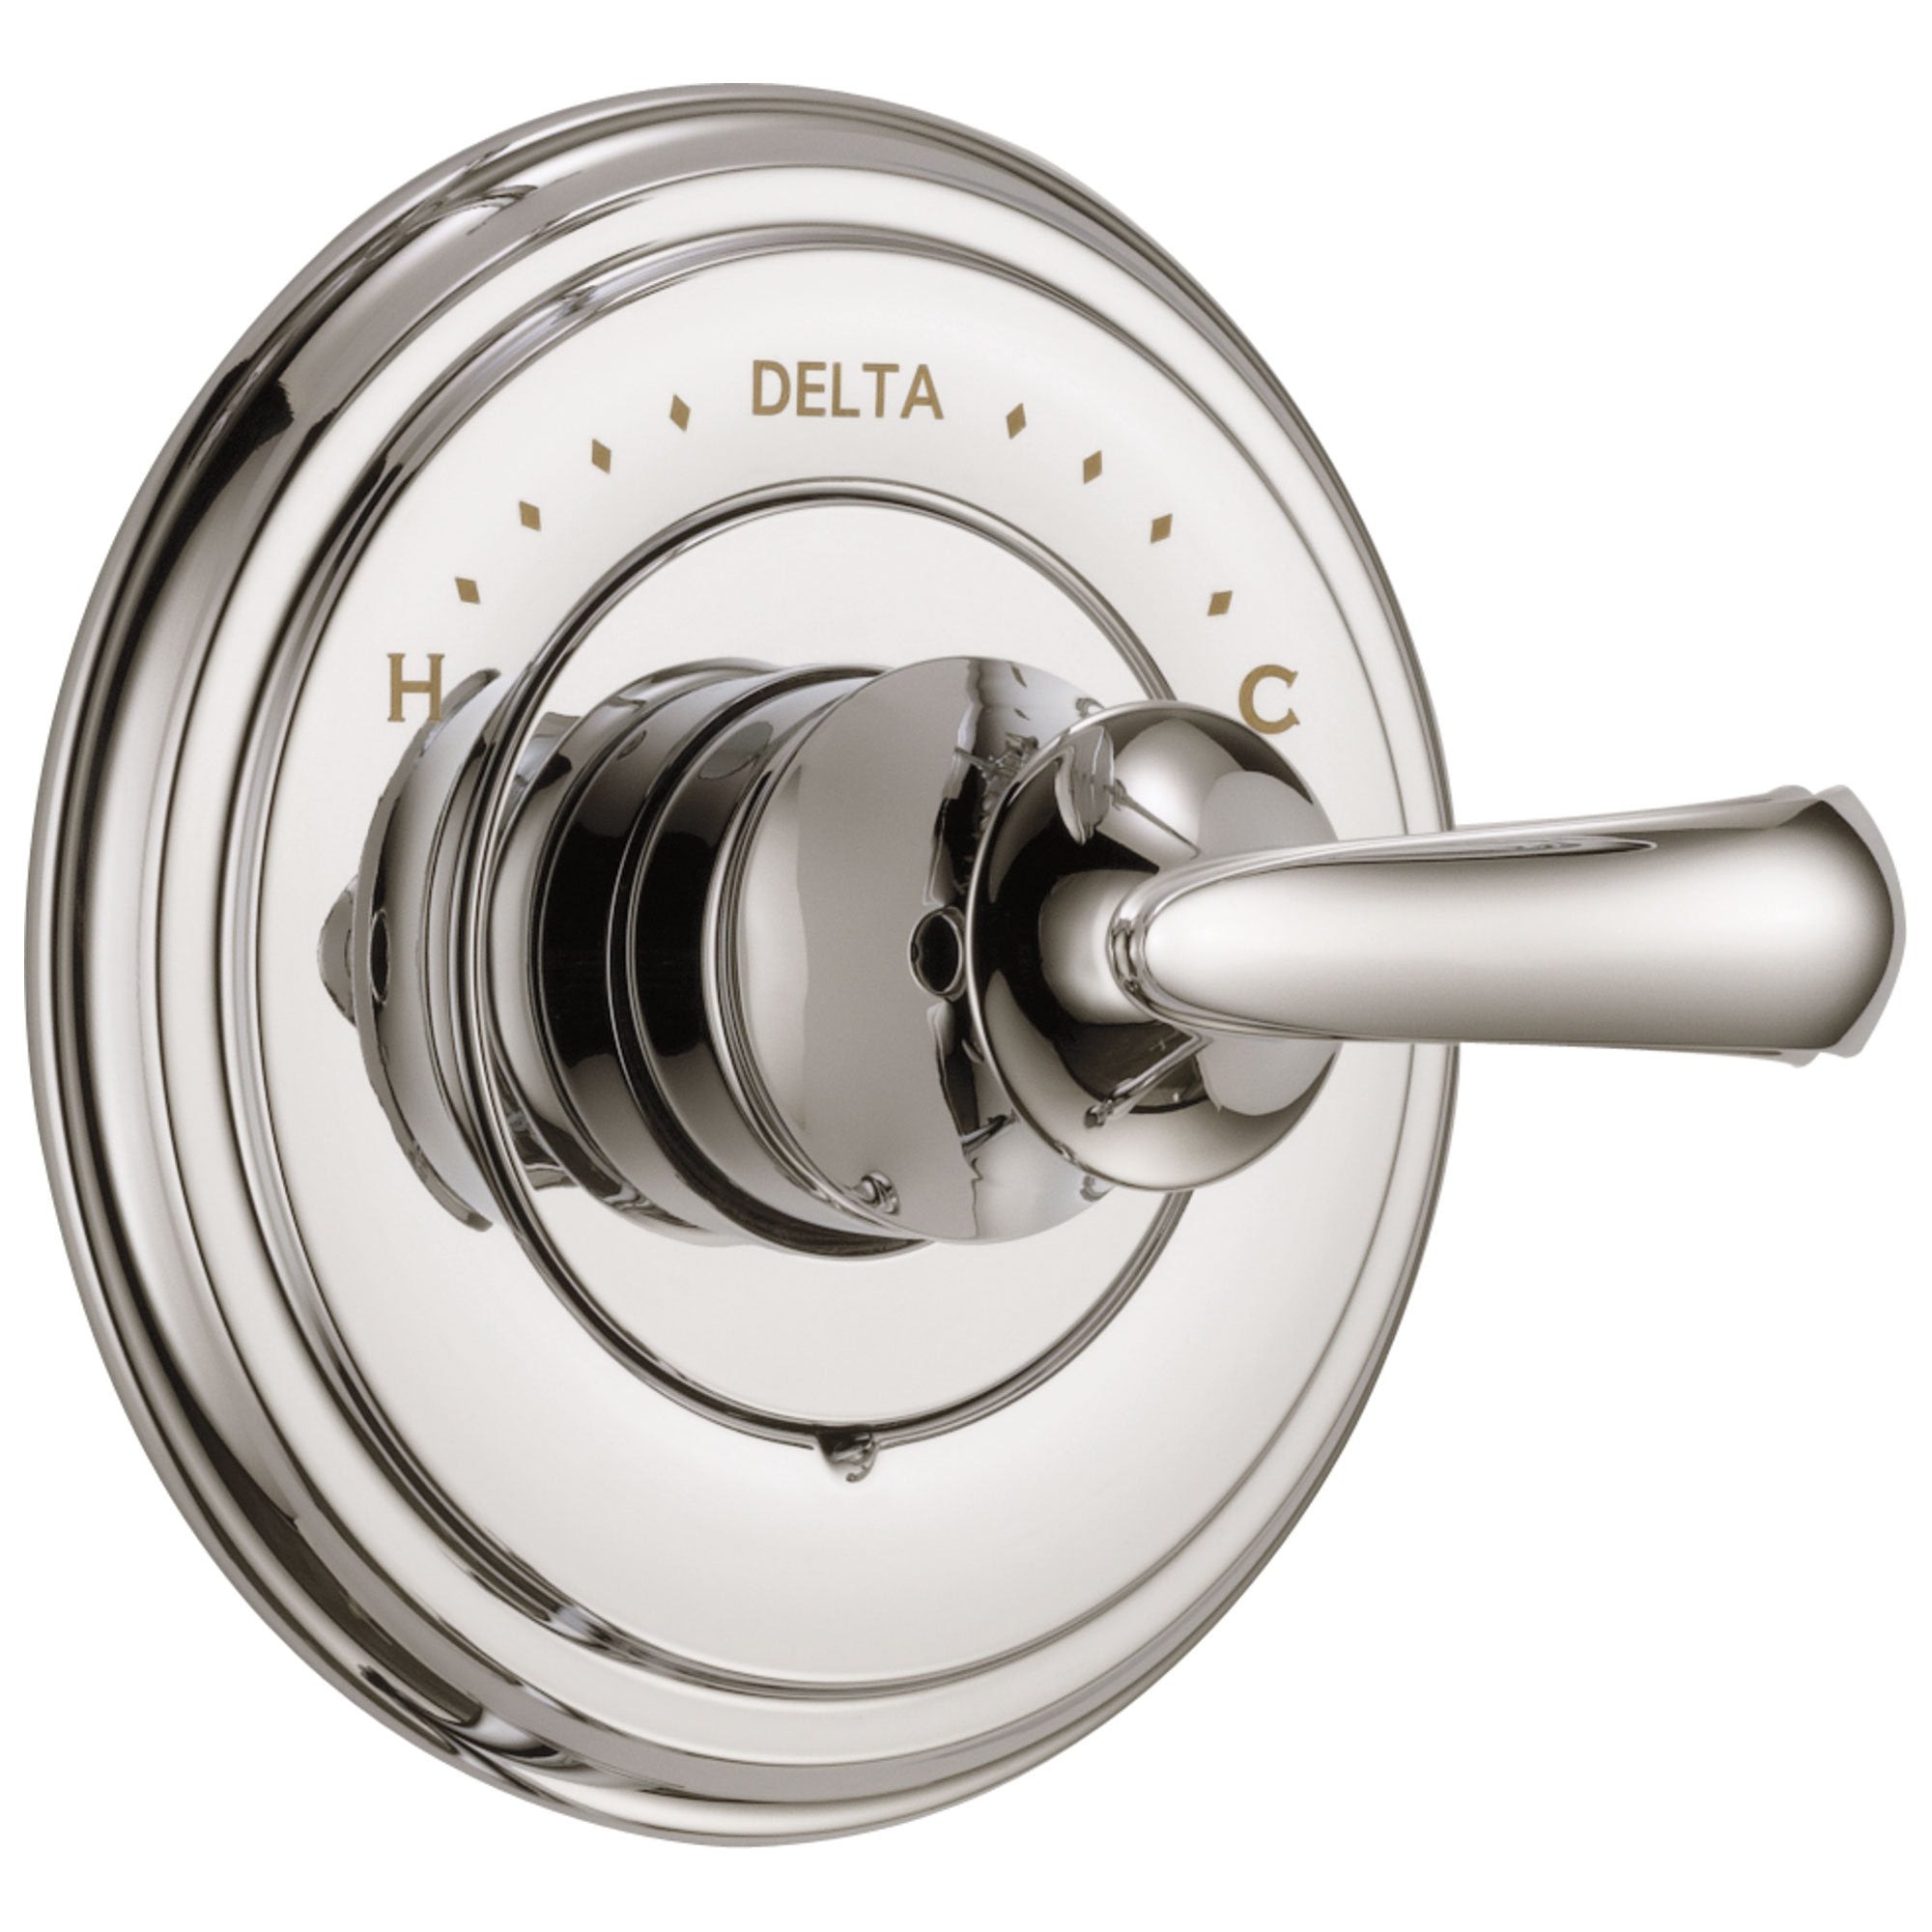 Delta Cassidy Collection Polished Nickel Monitor 14 Series Shower Valve Control Only INCLUDES Single French Scroll Lever Handle and Valve with Stops D1861V